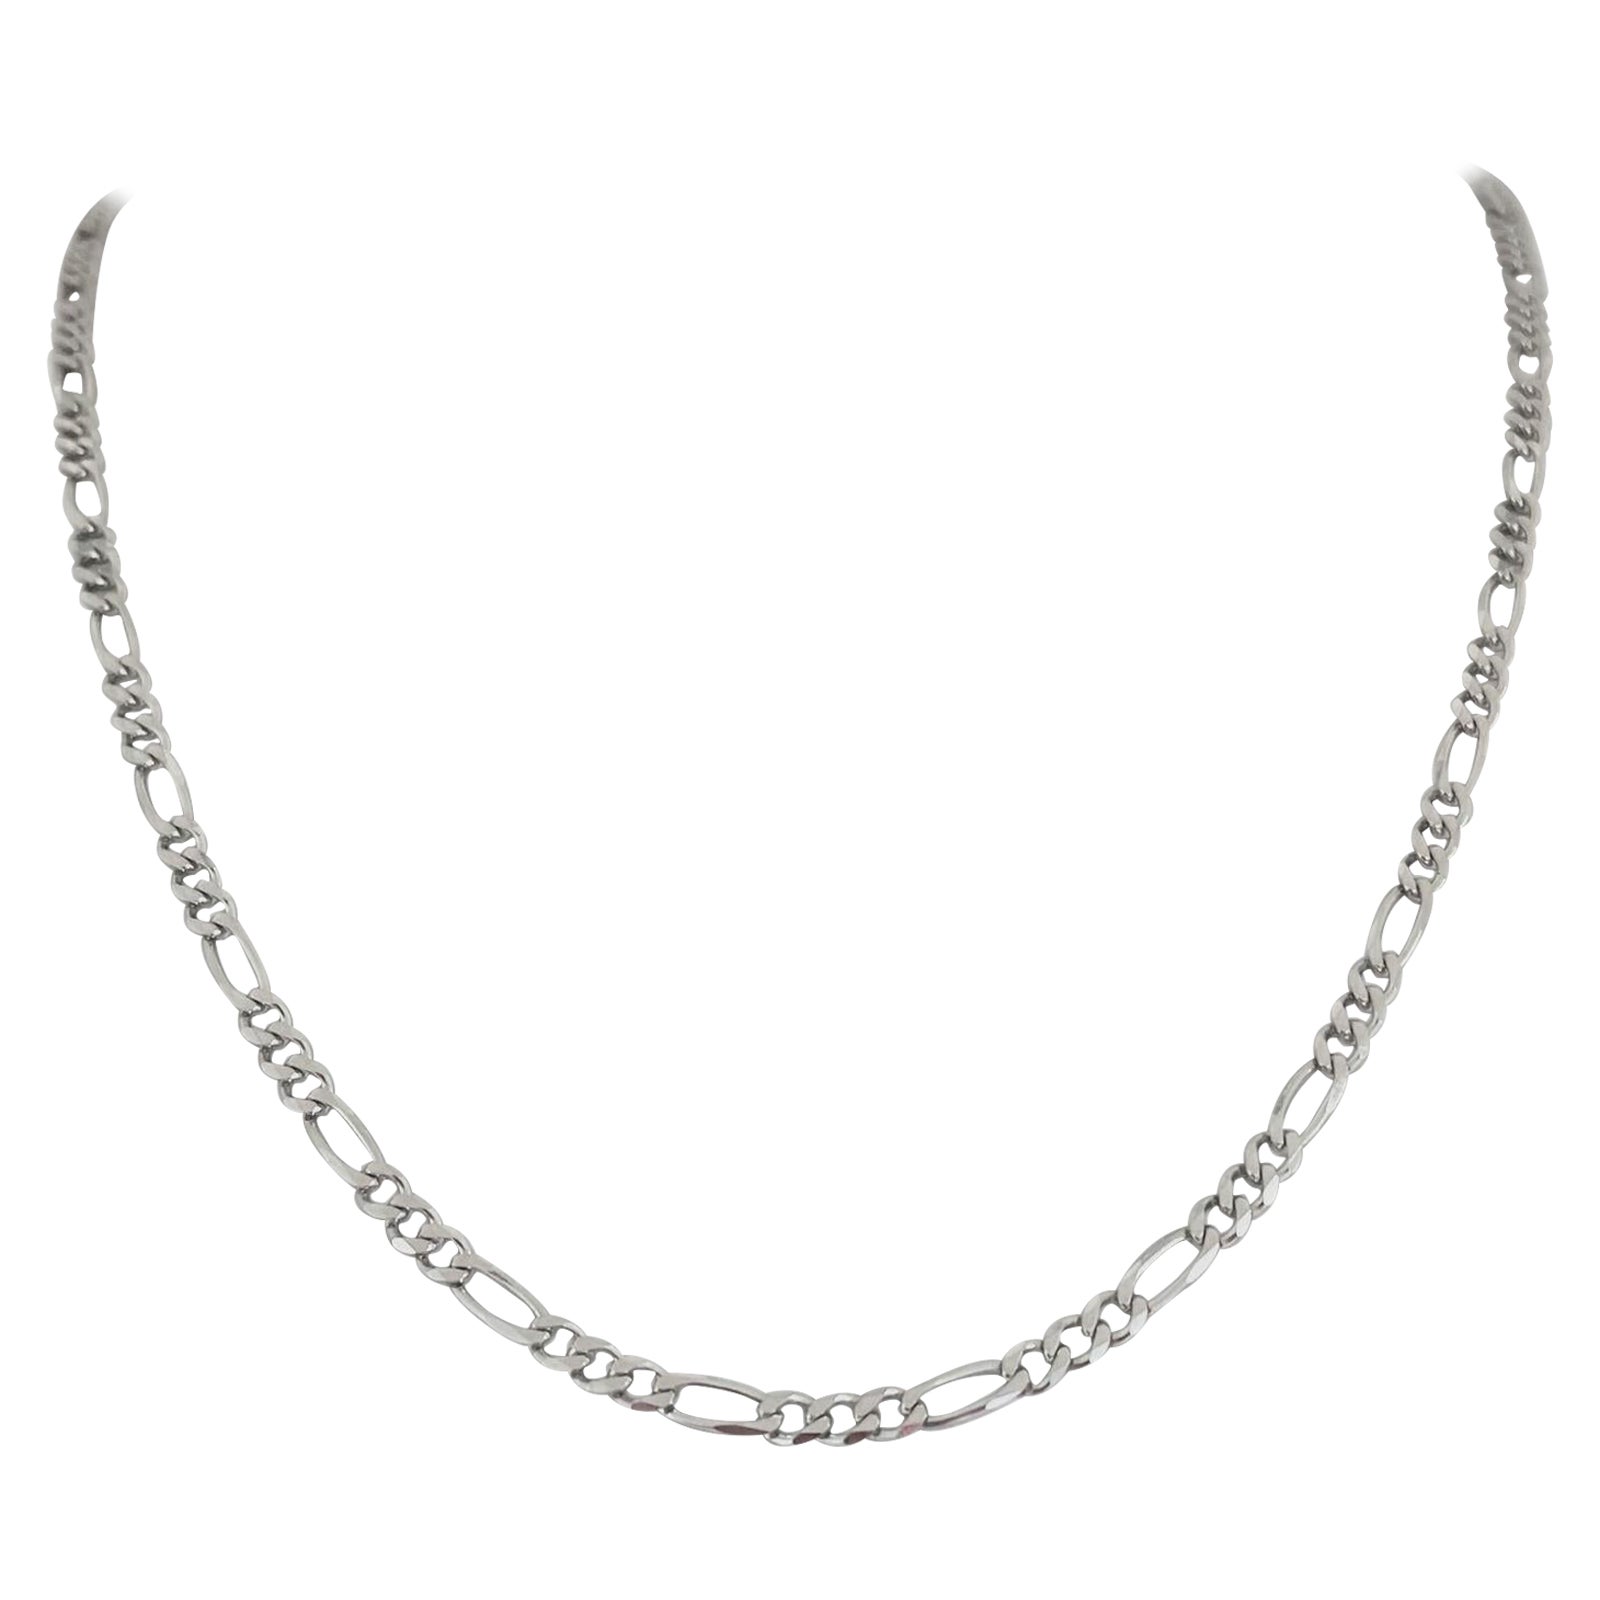 14 Karat White Gold Solid Figaro Link Chain Necklace, Italy 